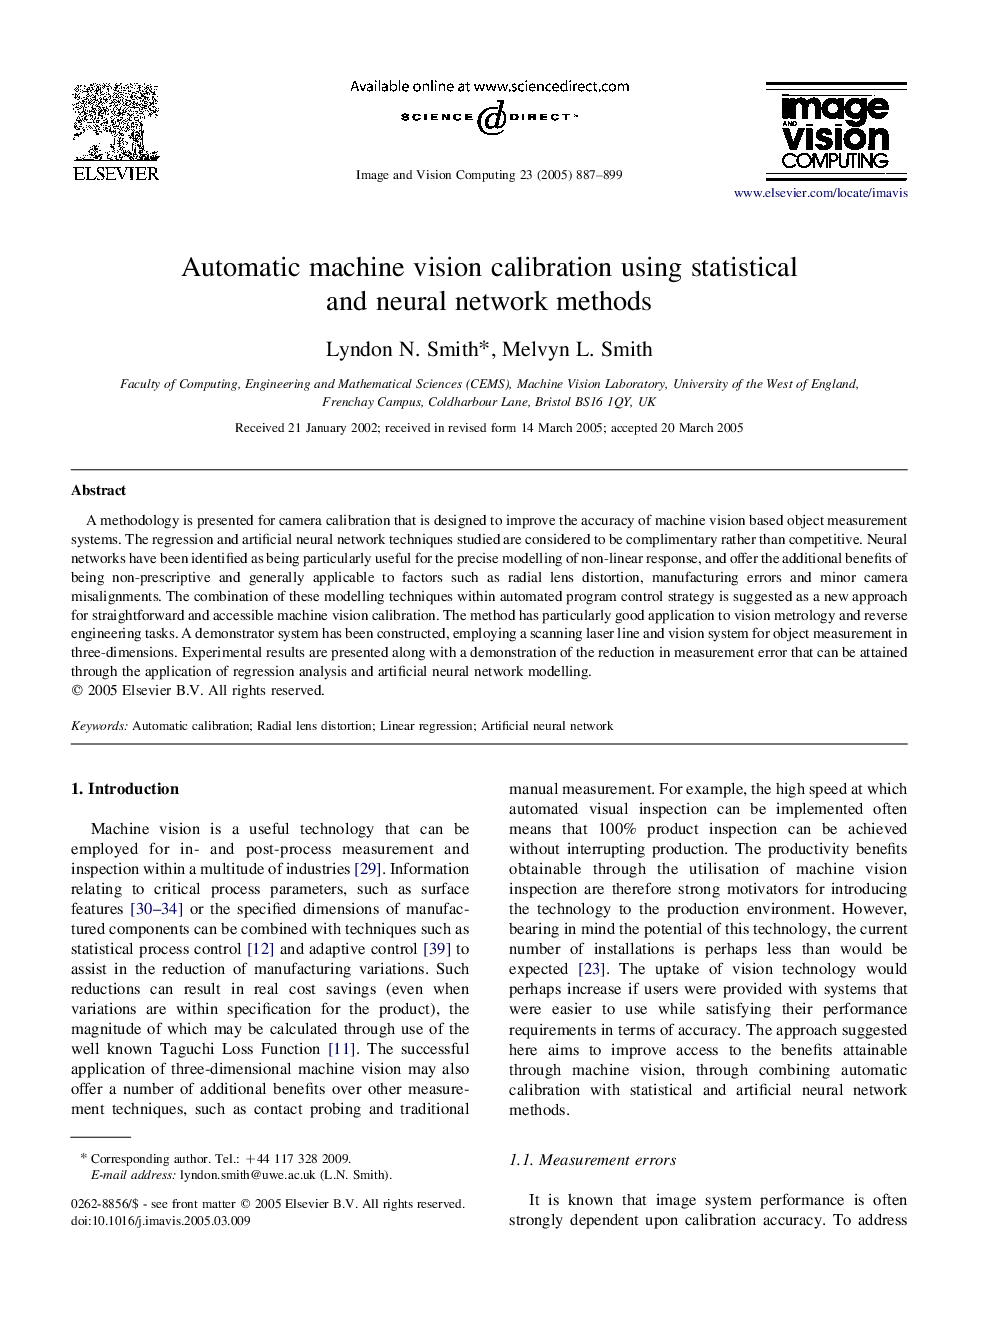 Automatic machine vision calibration using statistical and neural network methods